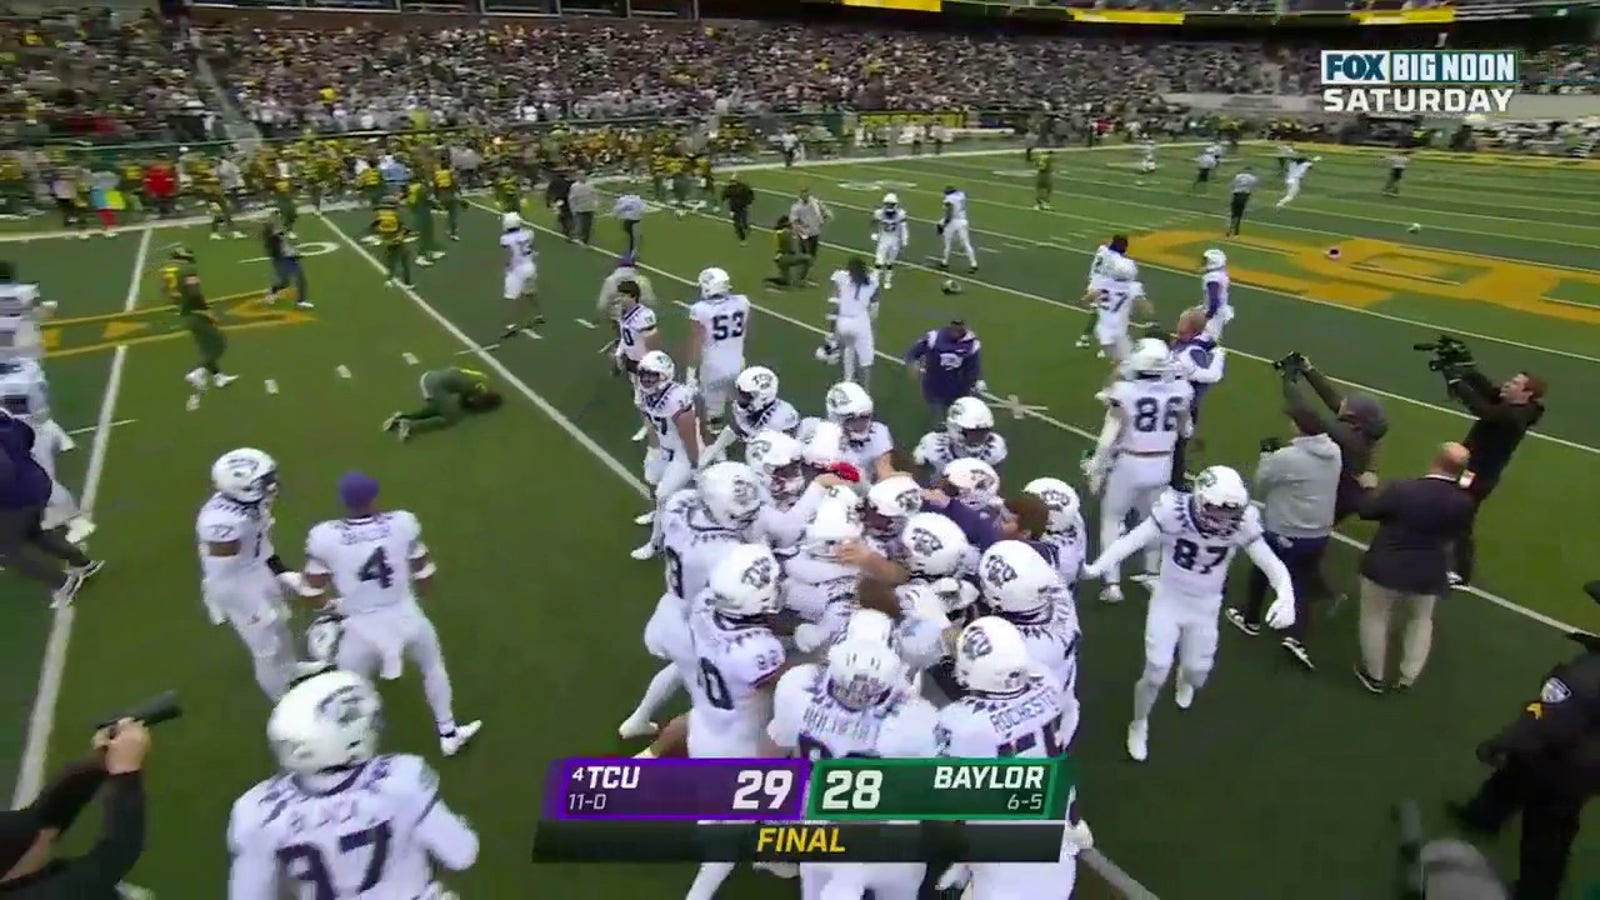 Watch: TCU stays undefeated with a last-second field goal